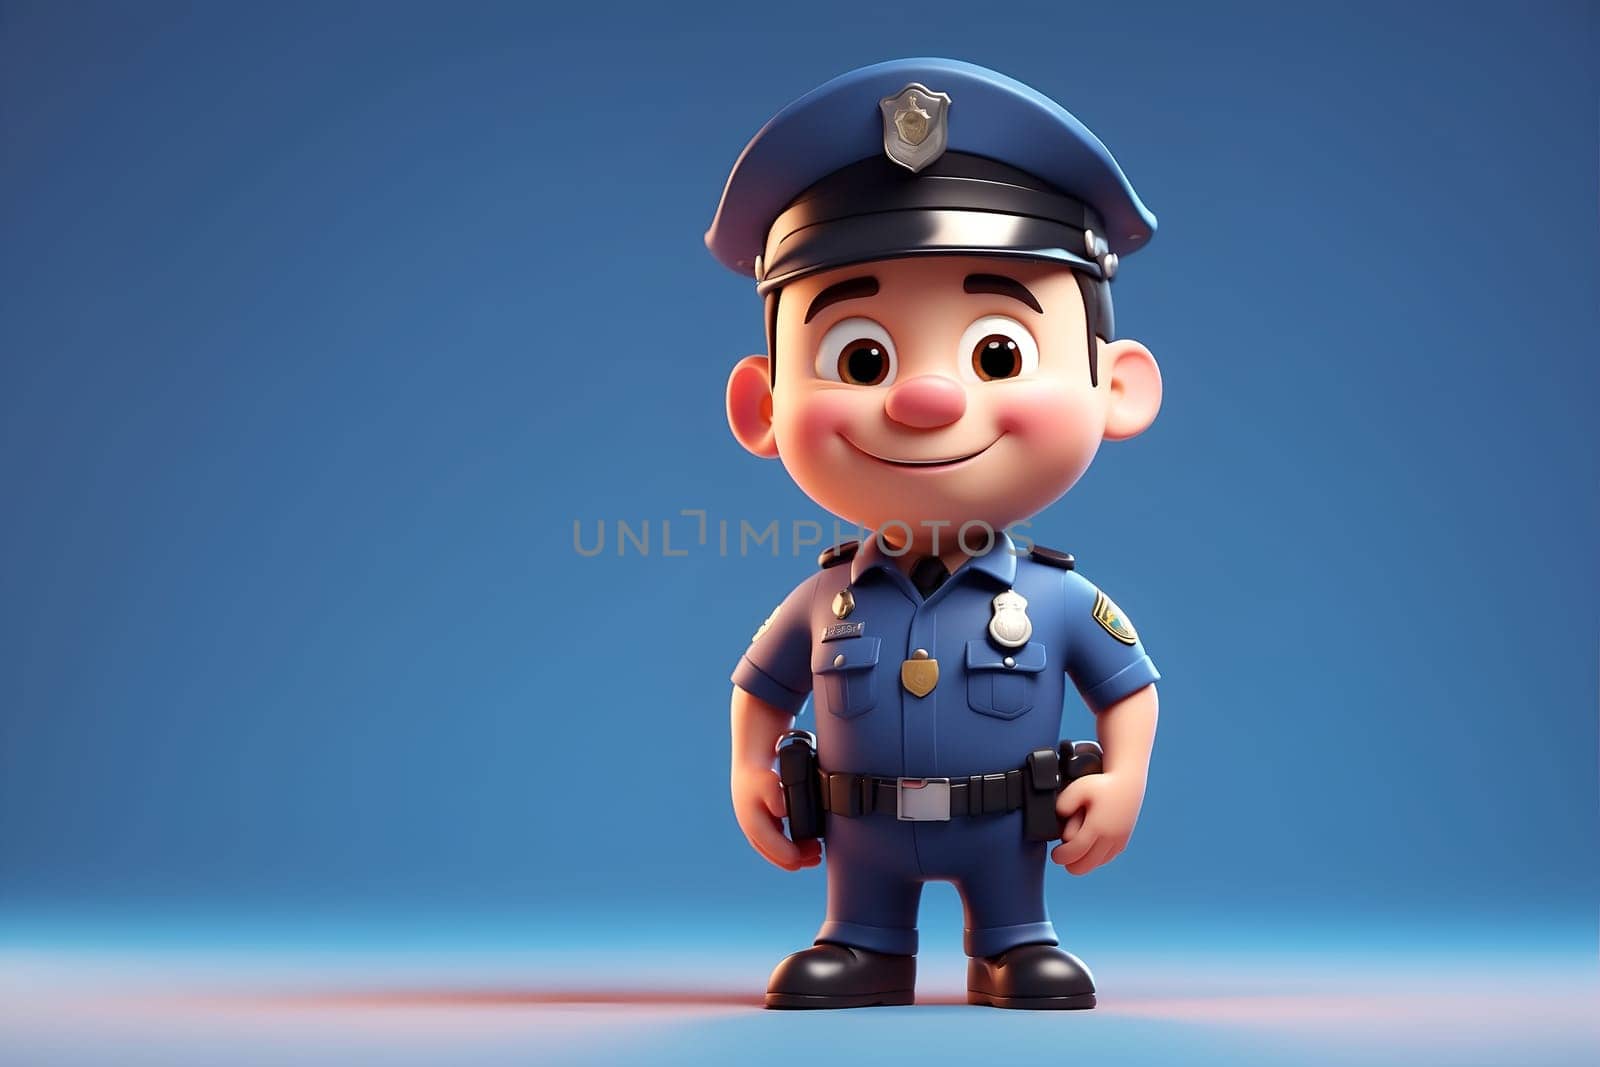 A cartoon police officer standing confidently in front of a vivid blue background.